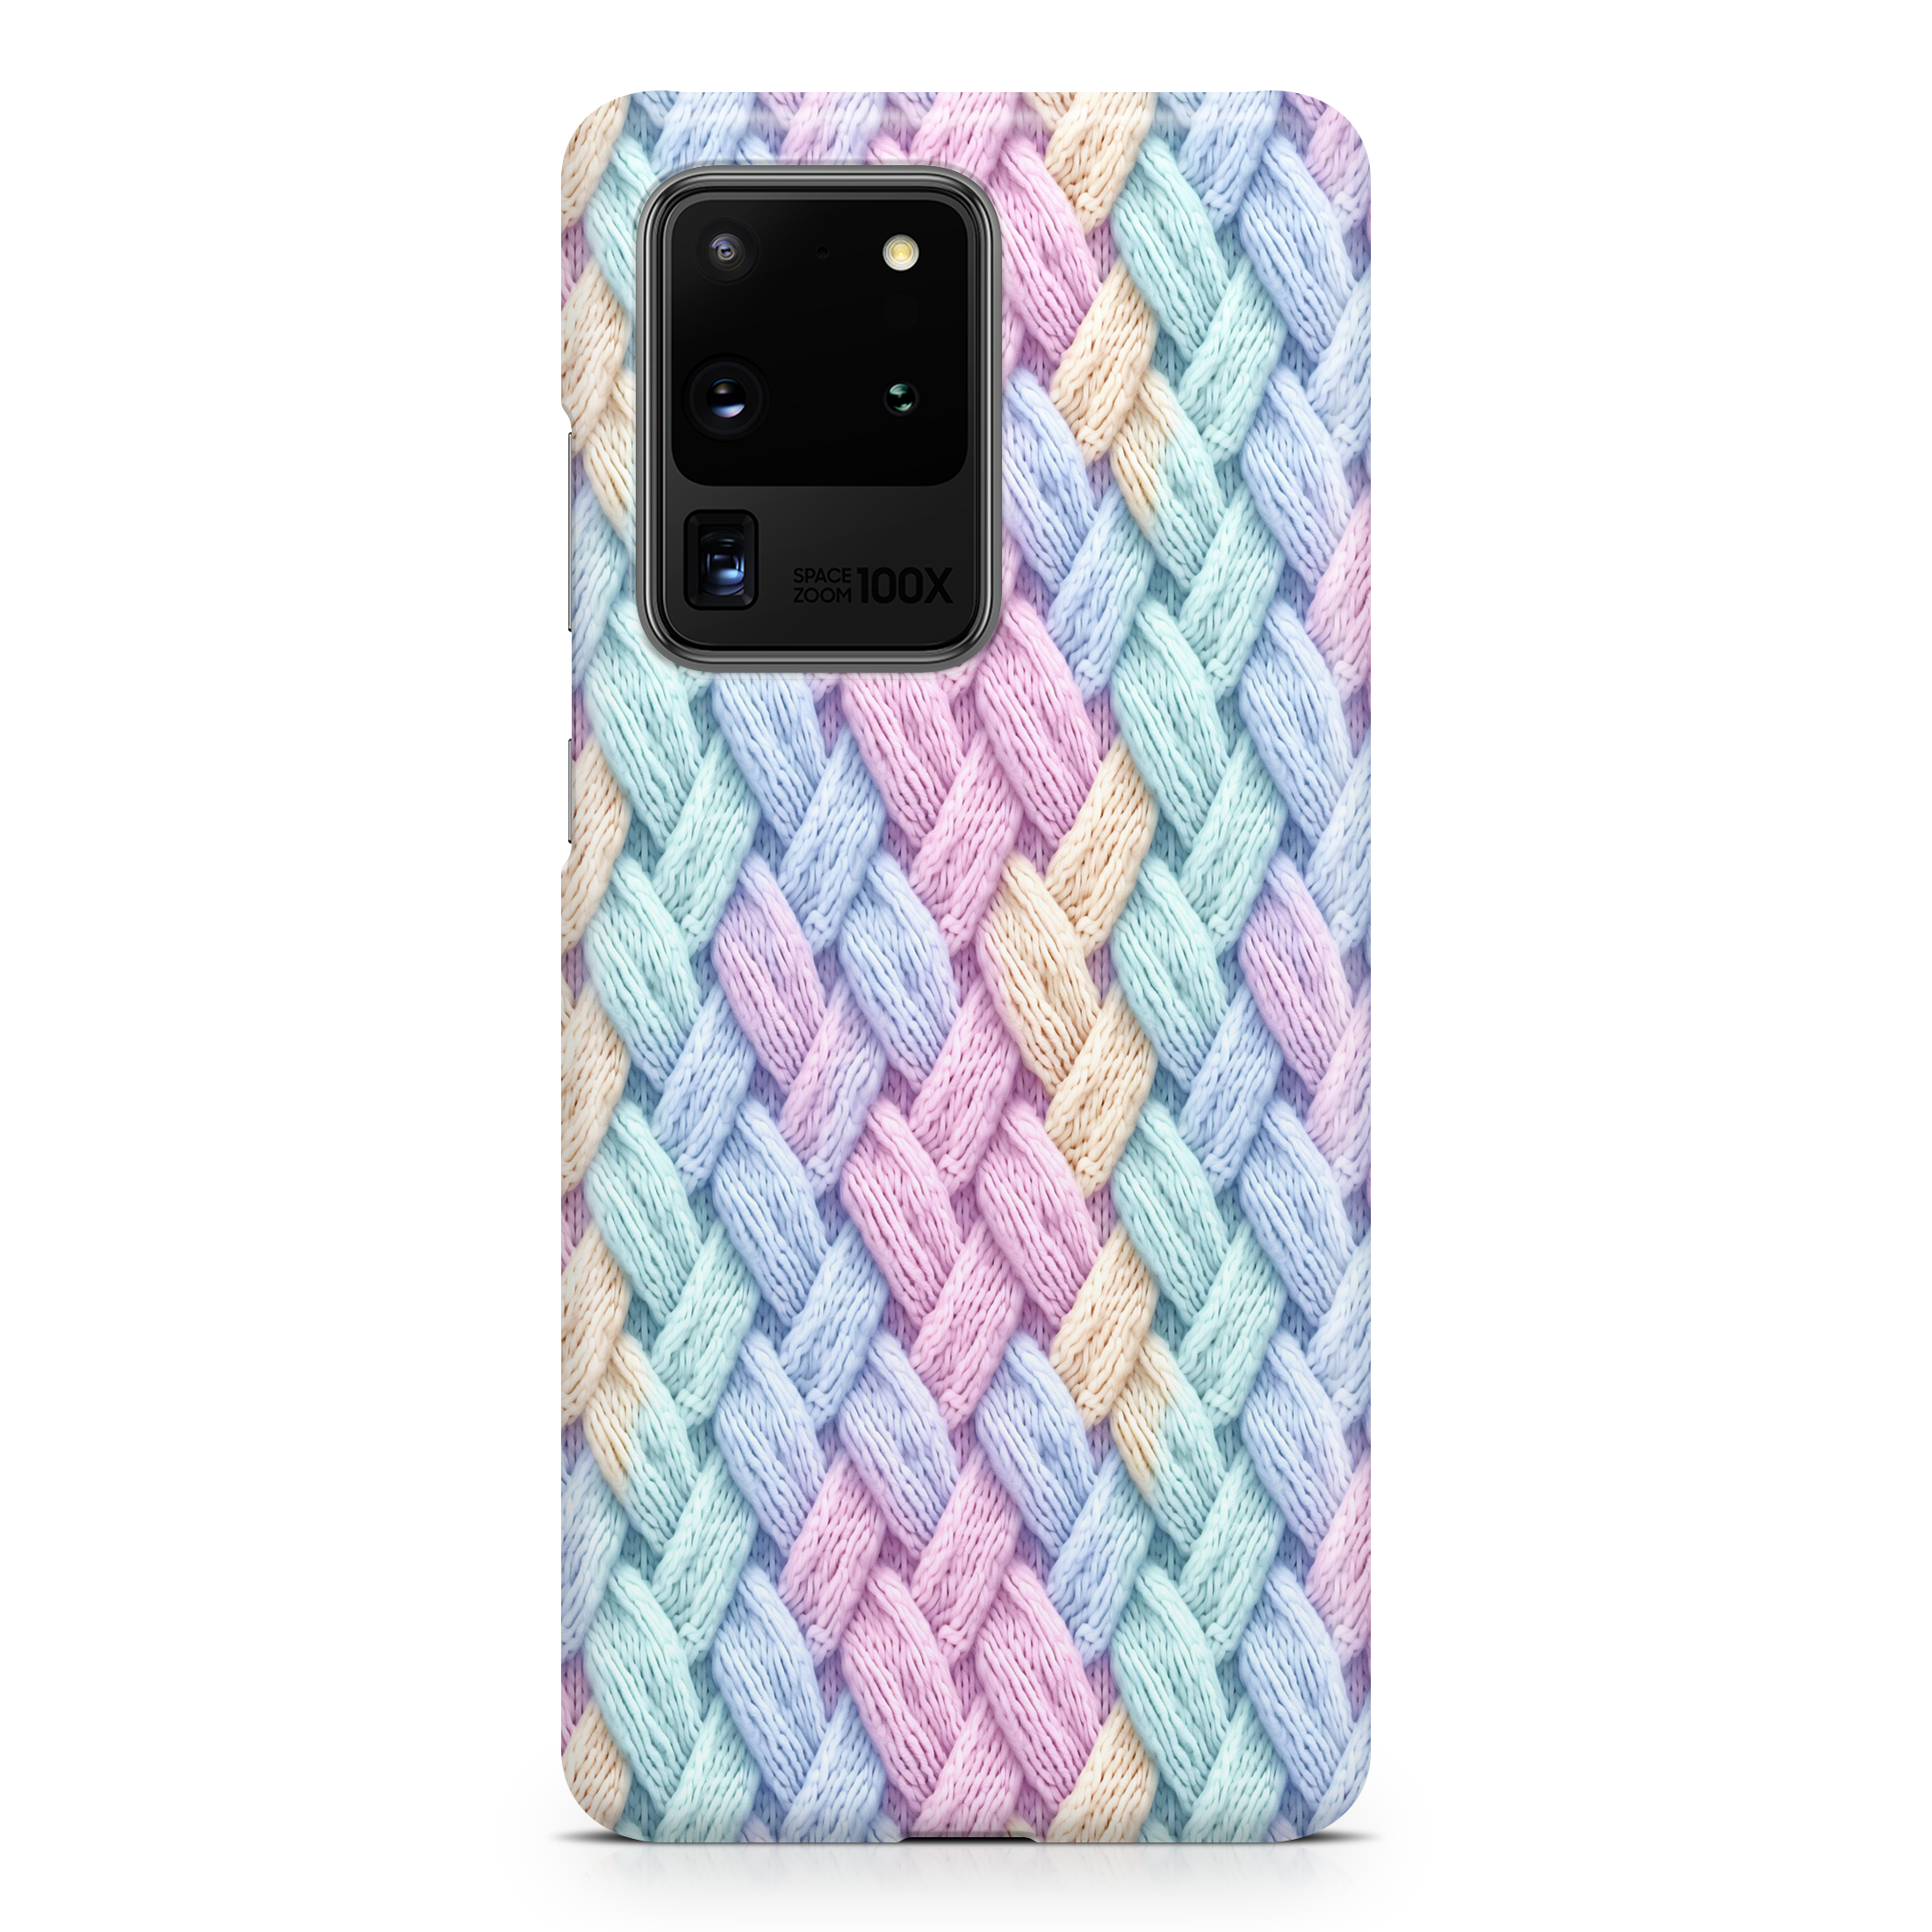 Whimsical Threads - Samsung phone case designs by CaseSwagger